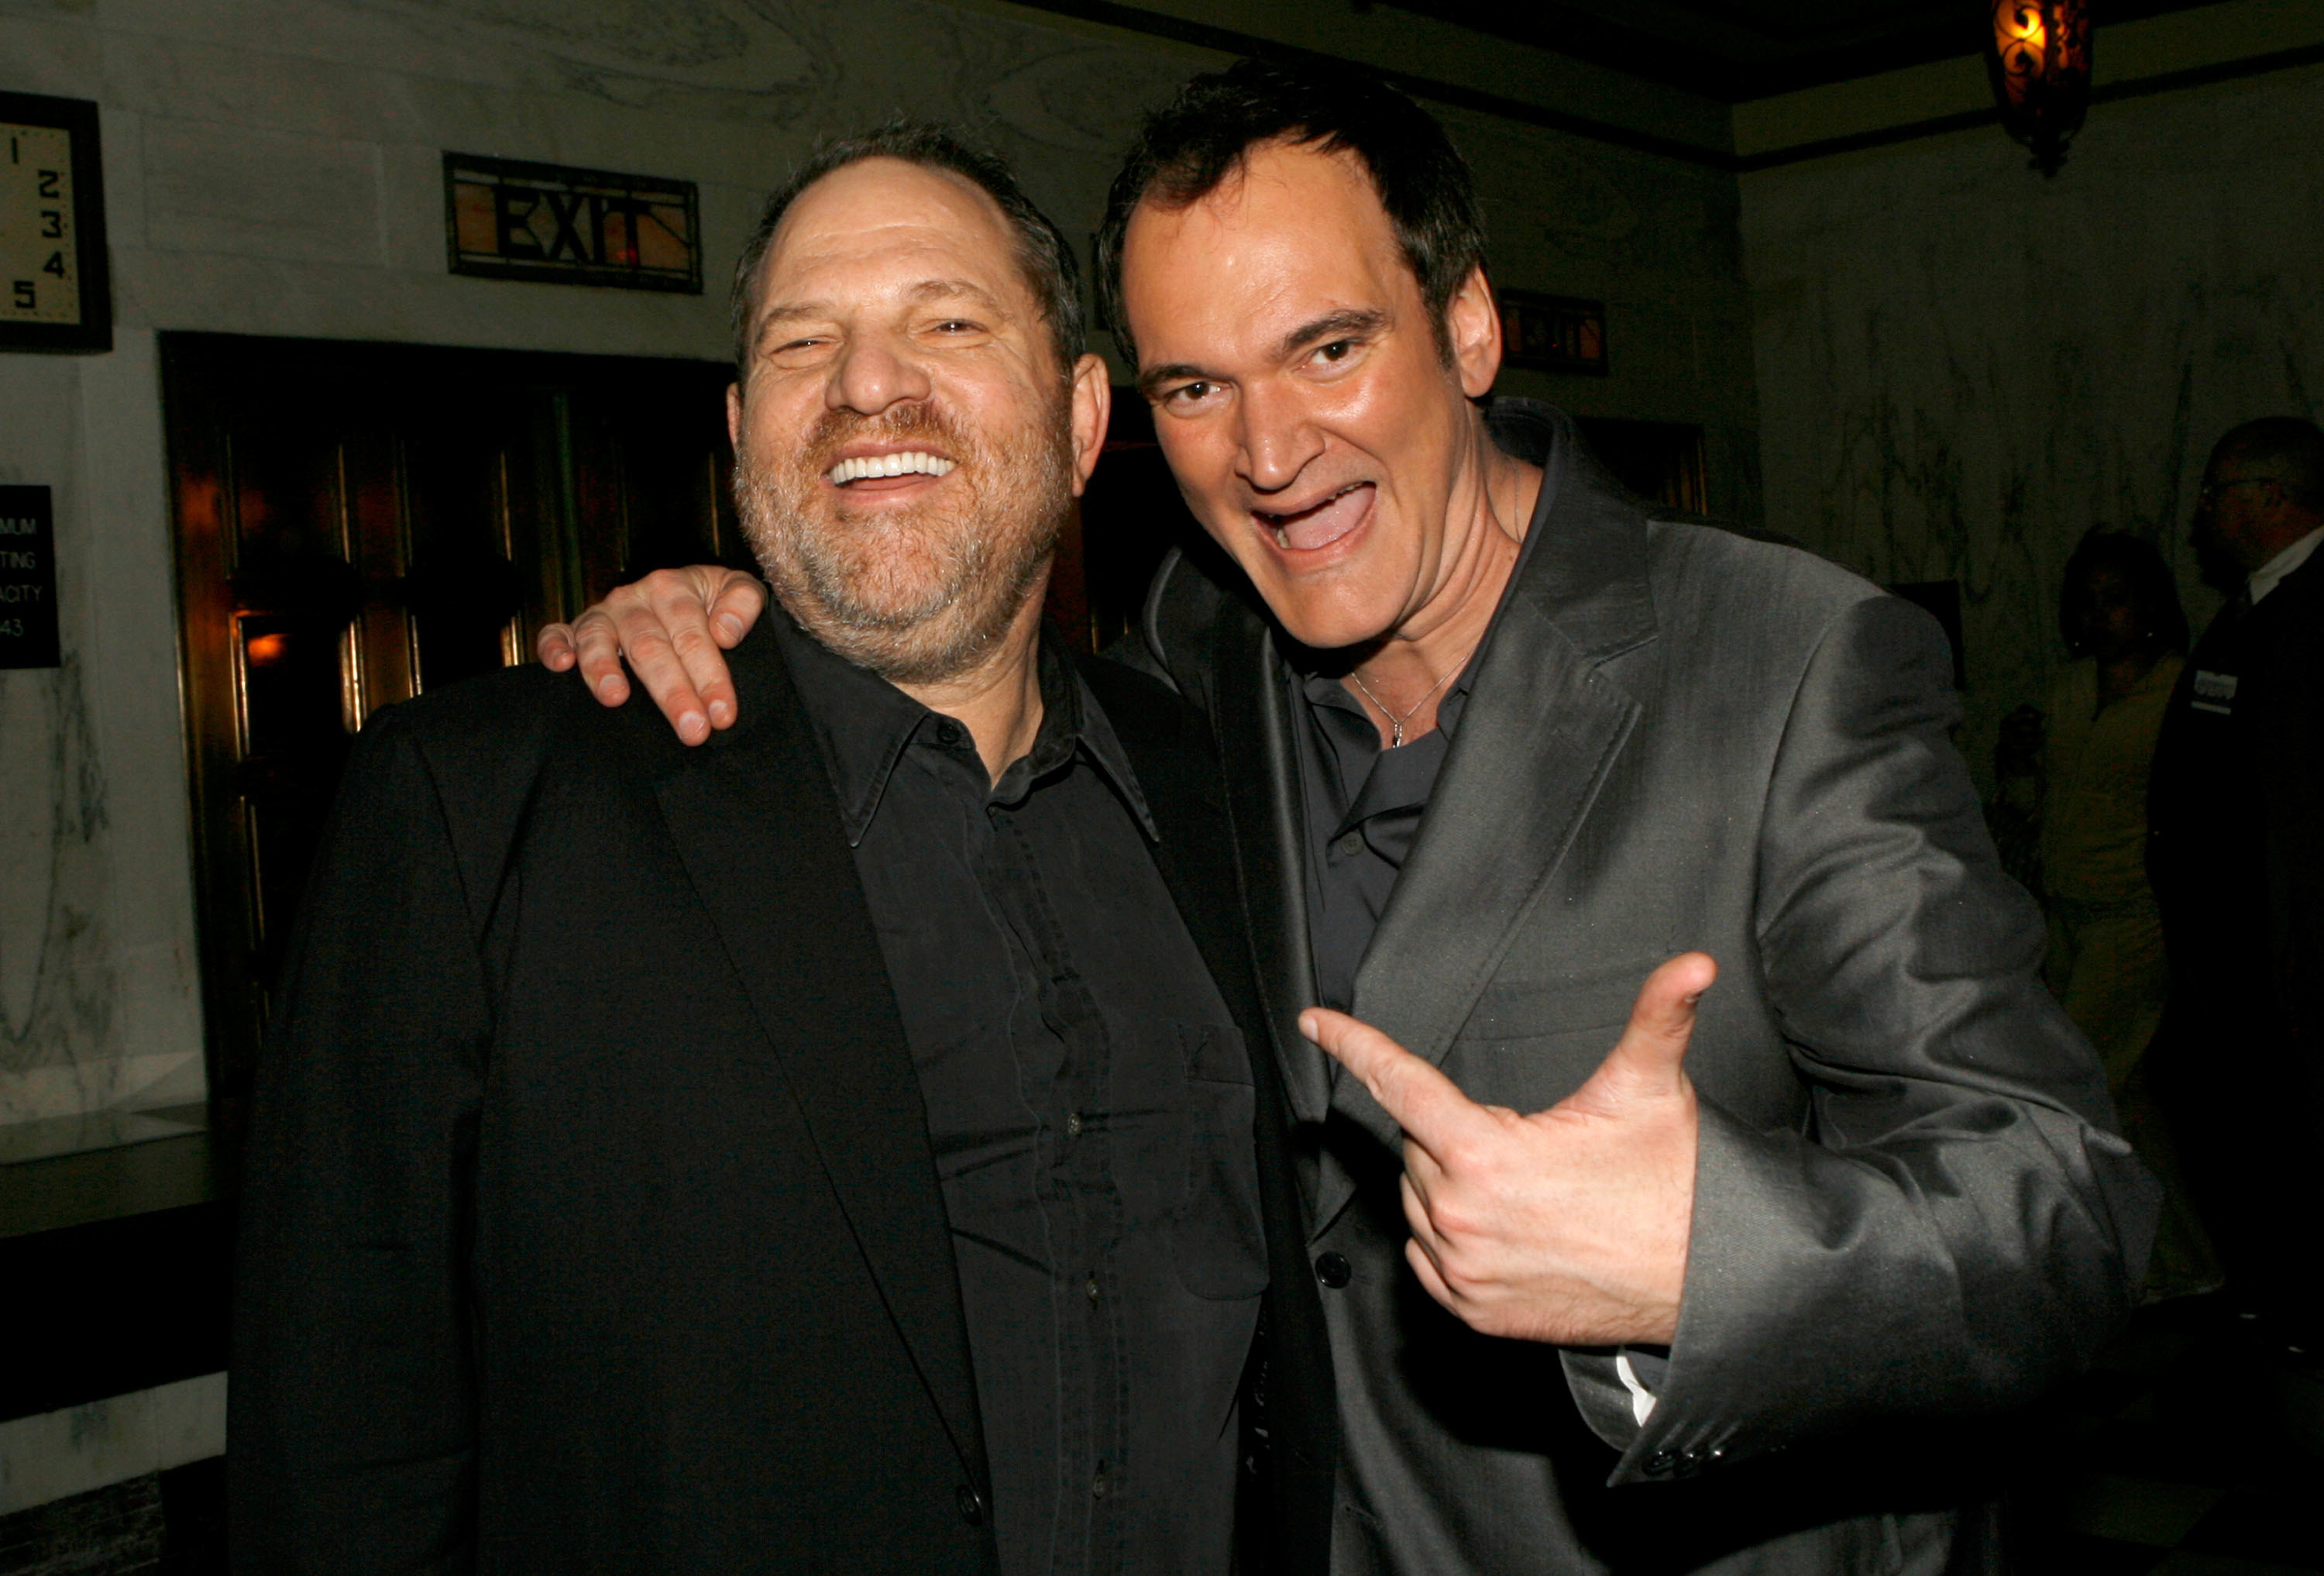 Tarantino points at Weinstein as both share a laugh